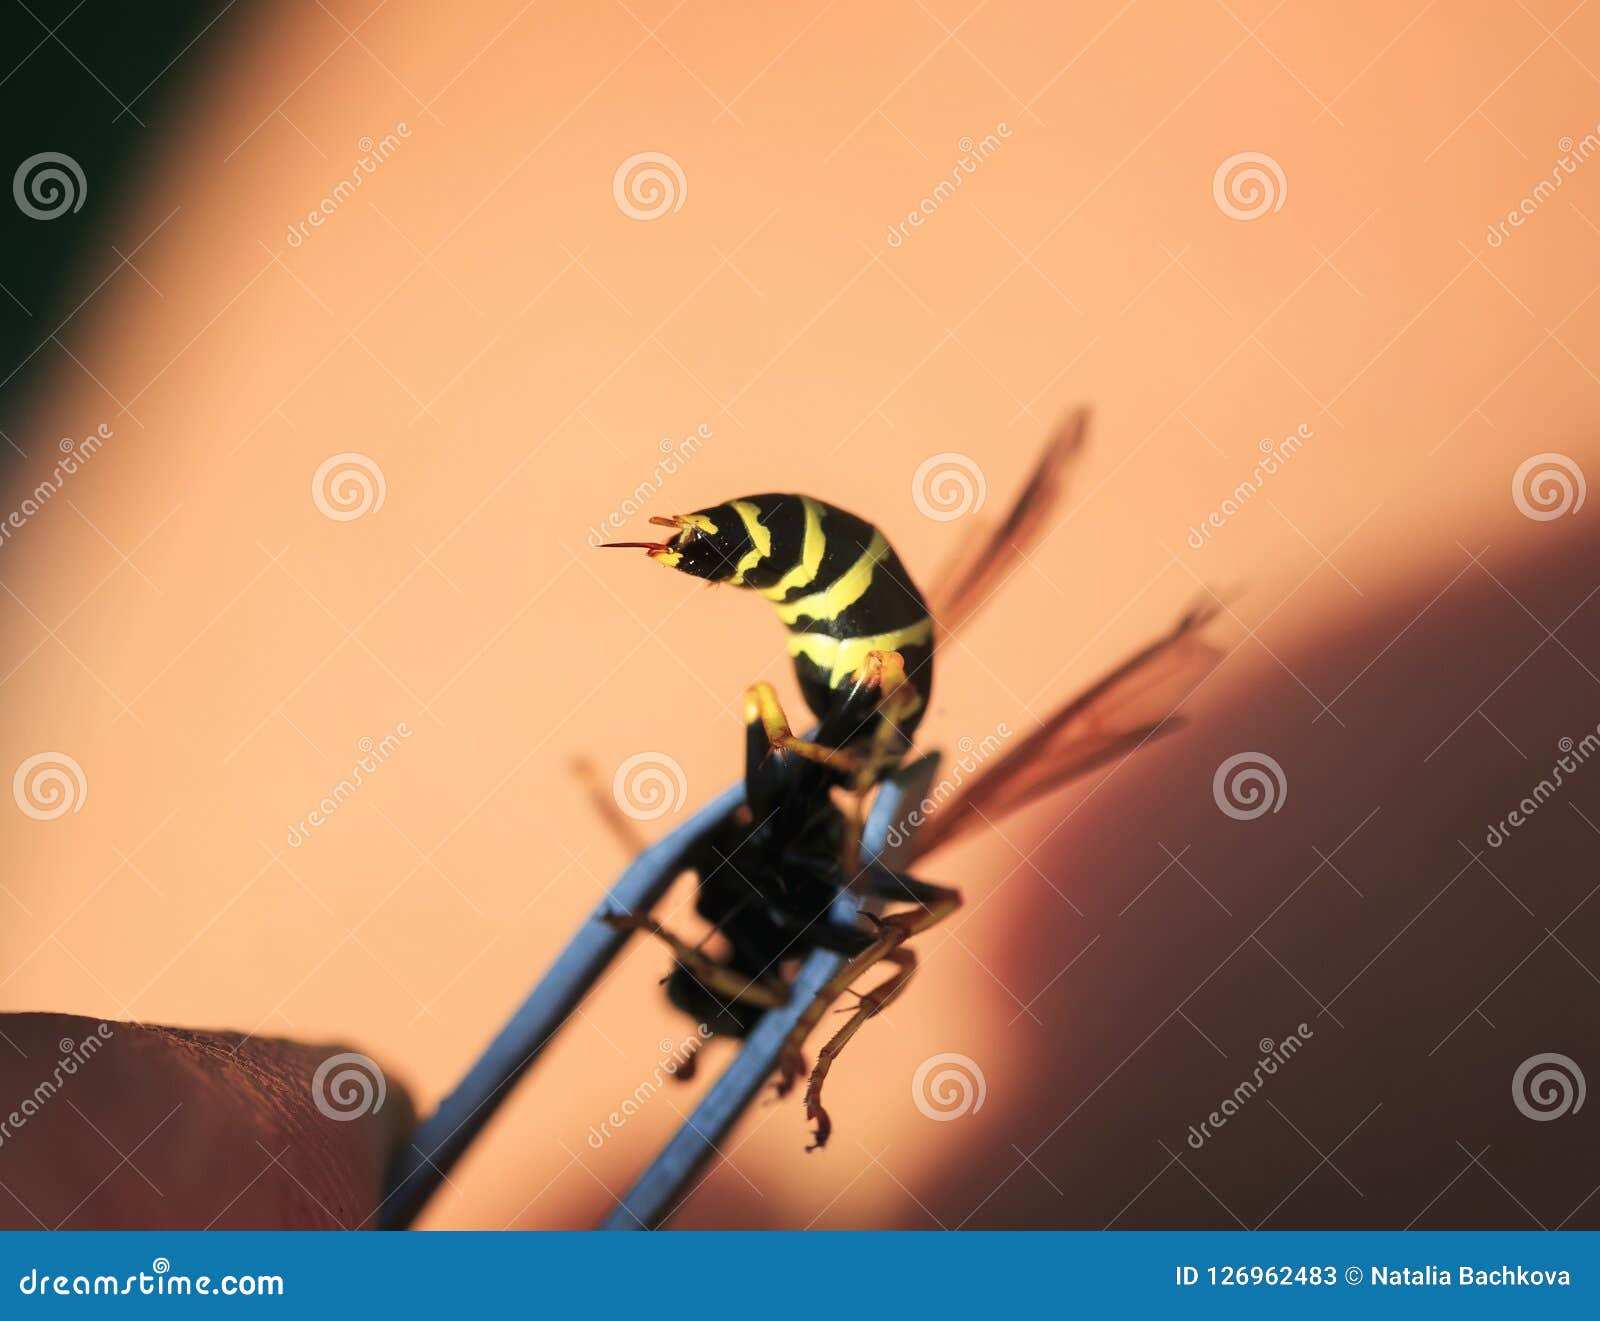 sting dangerous wasp trapped in a metal crimper bit